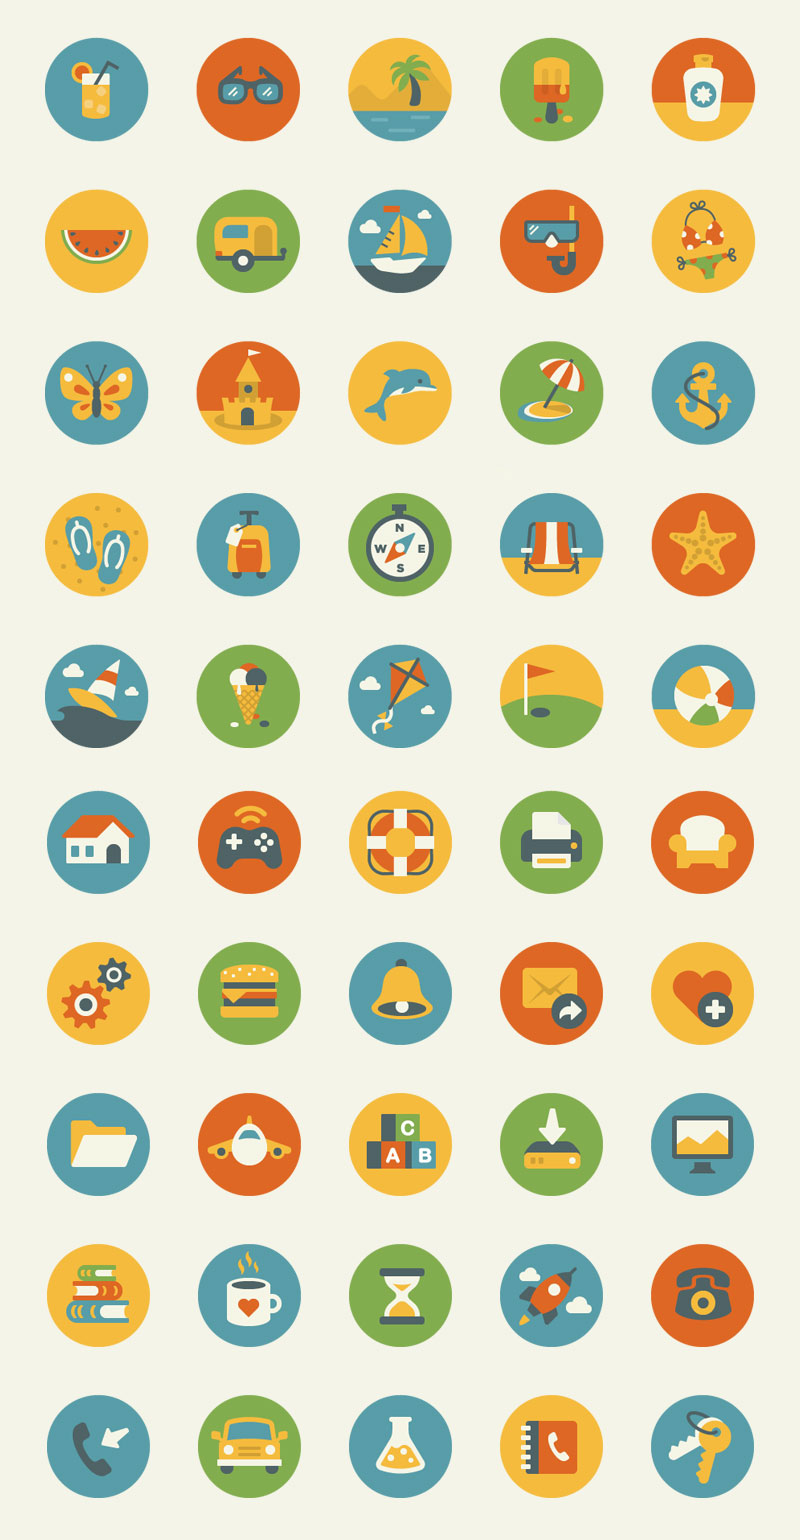 10 Awesome Free Flat Icons Packs